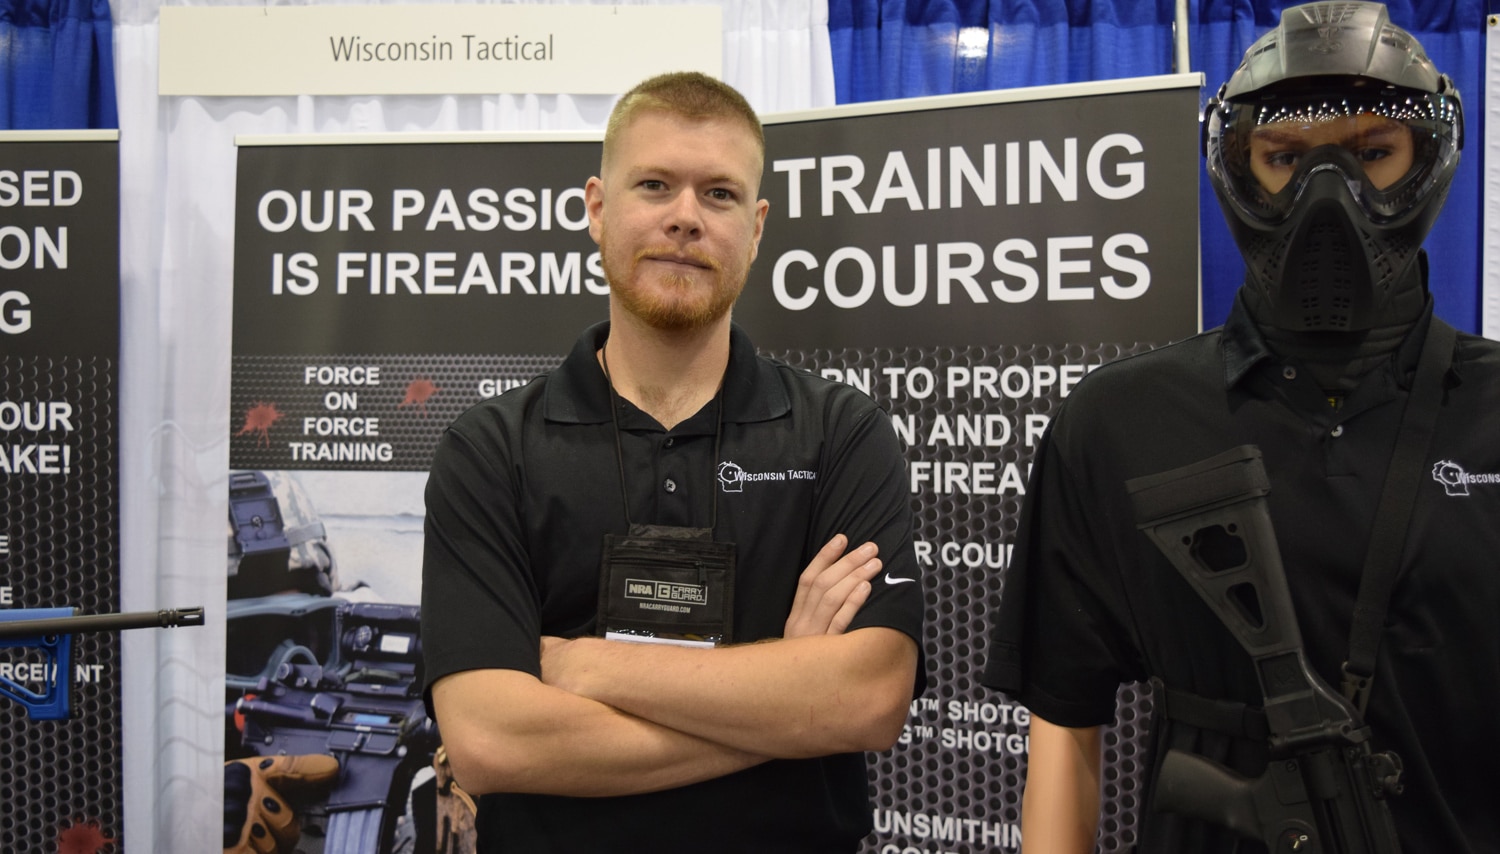 Training courses? Custom firearms? Force on force? Check out Waukesha's Wisconsin Tactical. 